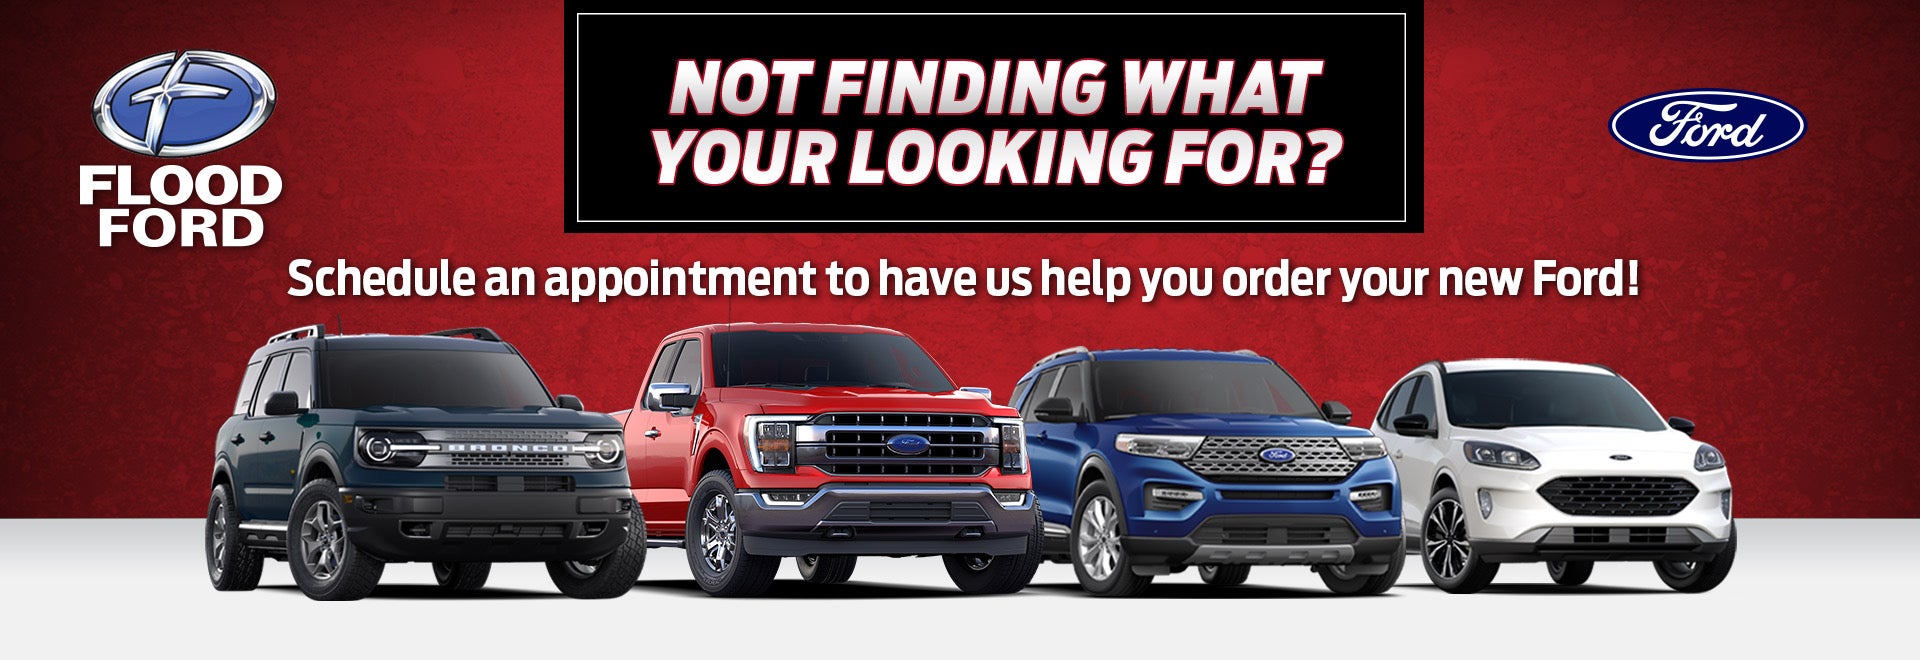 Find your next Ford